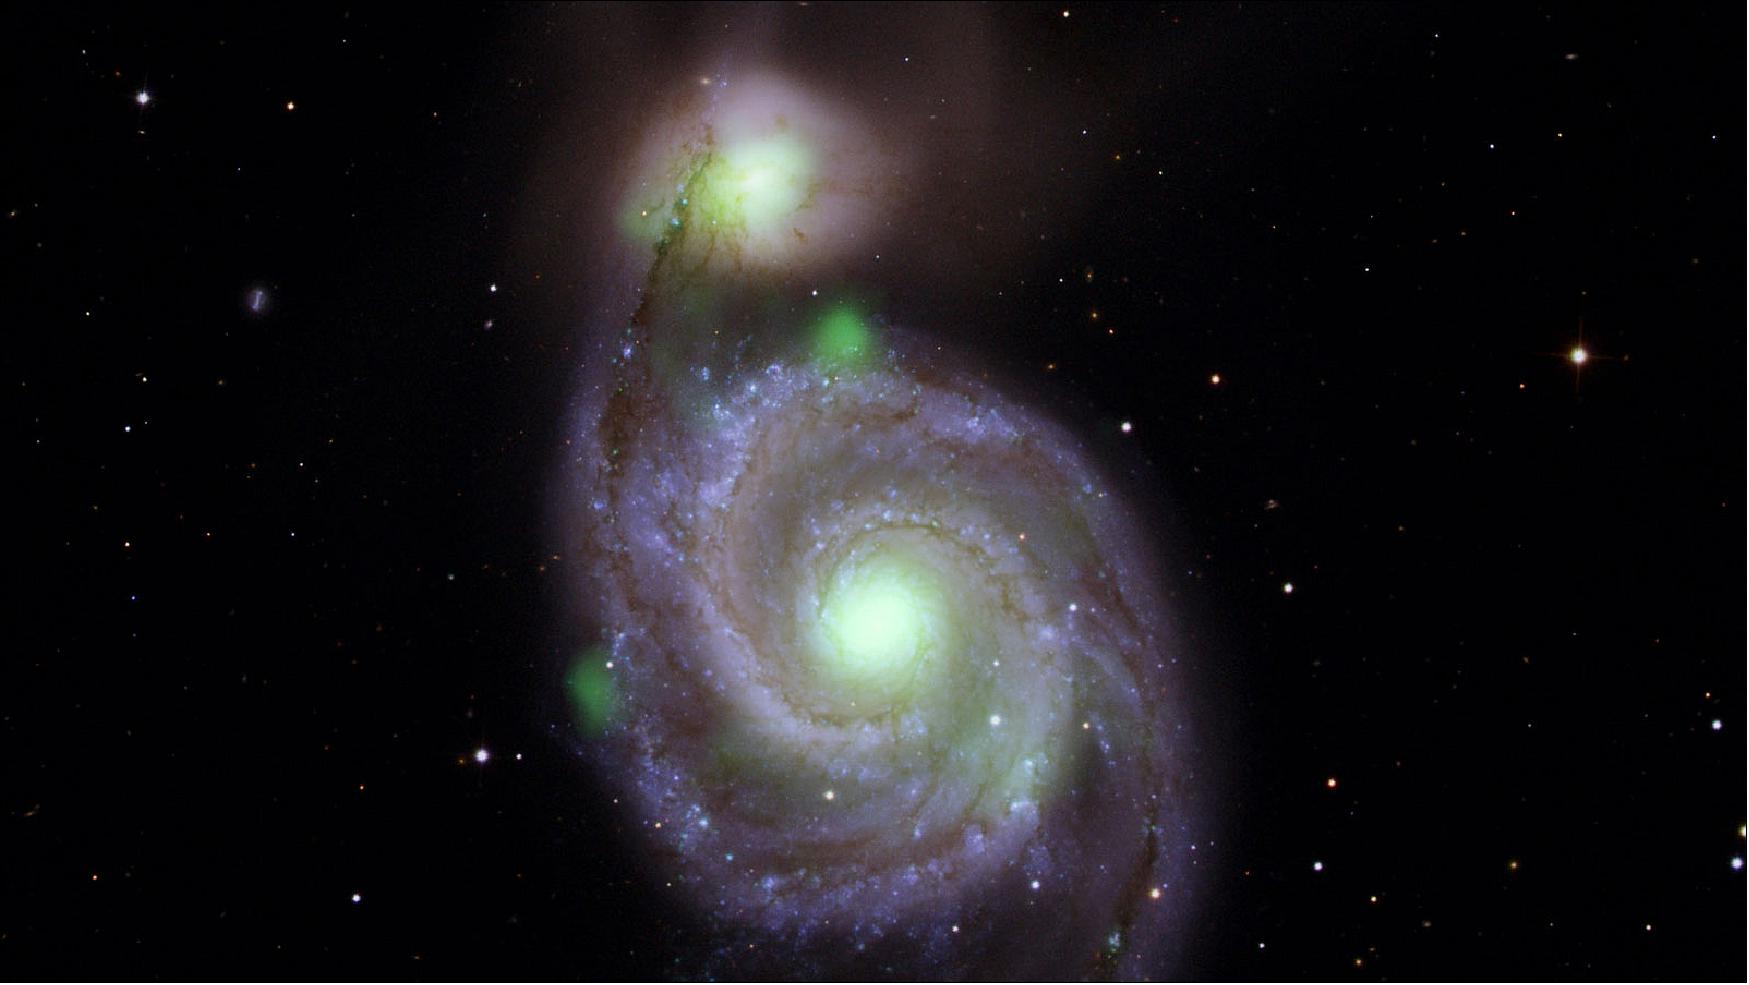 Figure 22: Bright green sources of high-energy X-ray light captured by NASA's NuSTAR mission are overlaid on an optical-light image of the Whirlpool galaxy (in the center of the image) and its companion galaxy, M51b (the bright greenish-white spot above the Whirlpool), taken by the Sloan Digital Sky Survey (image credit: NASA/JPL-Caltech, IPAC)